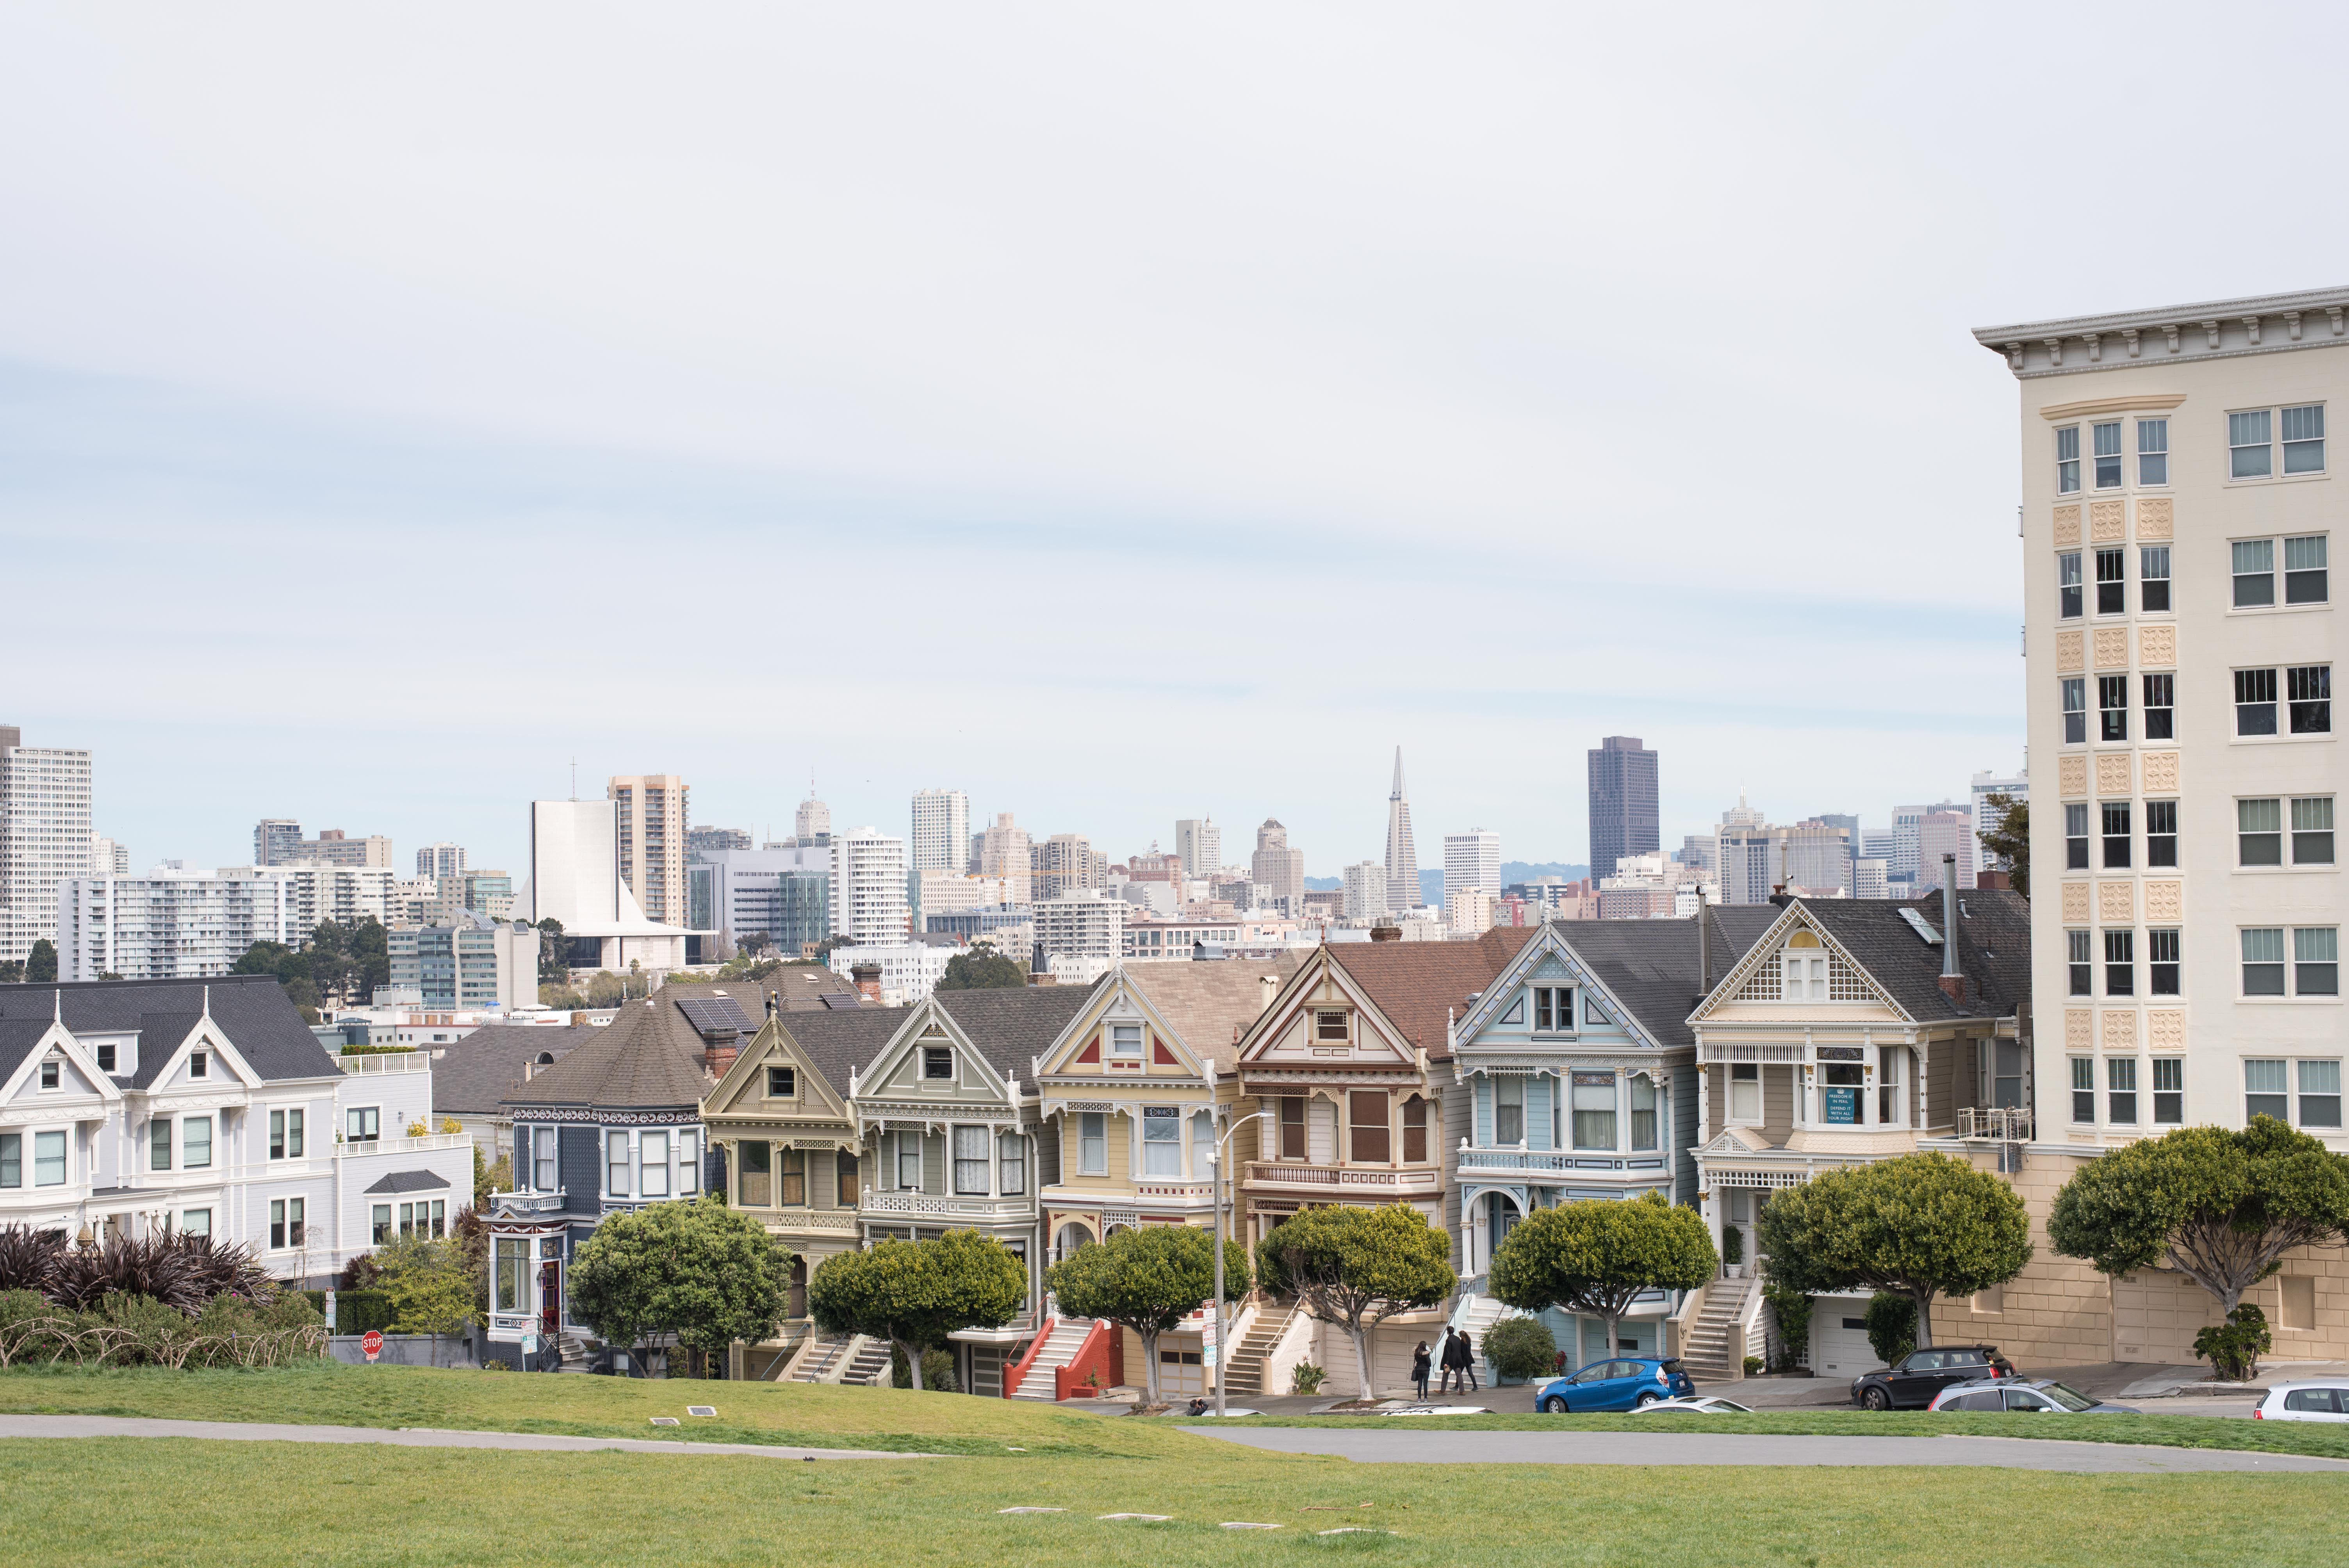 San Francisco Travel Guide - The Painted Ladies